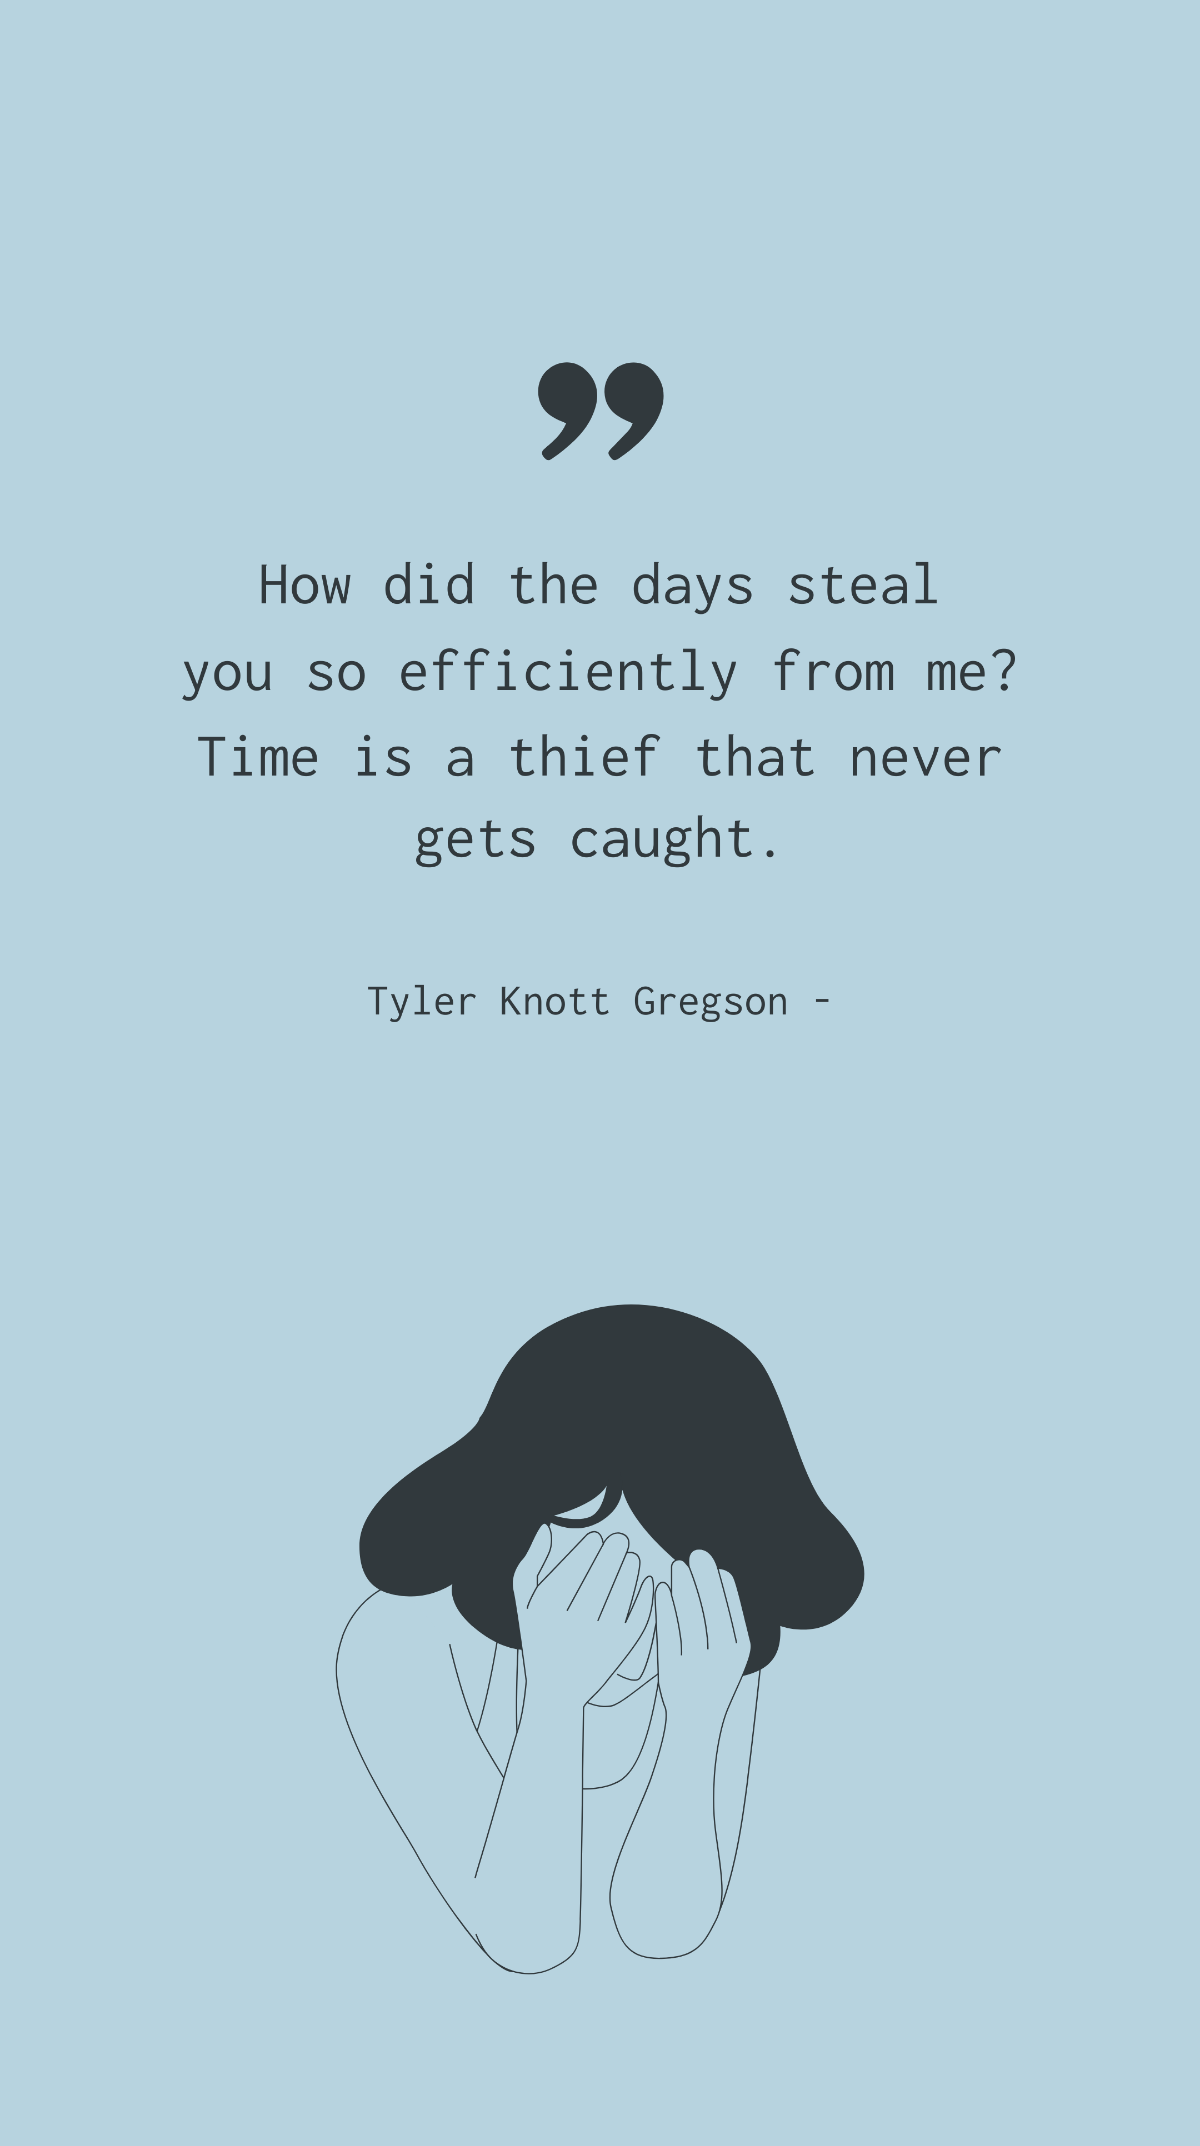 Tyler Knott Gregson - How did the days steal you so efficiently from me? Time is a thief that never gets caught. Template